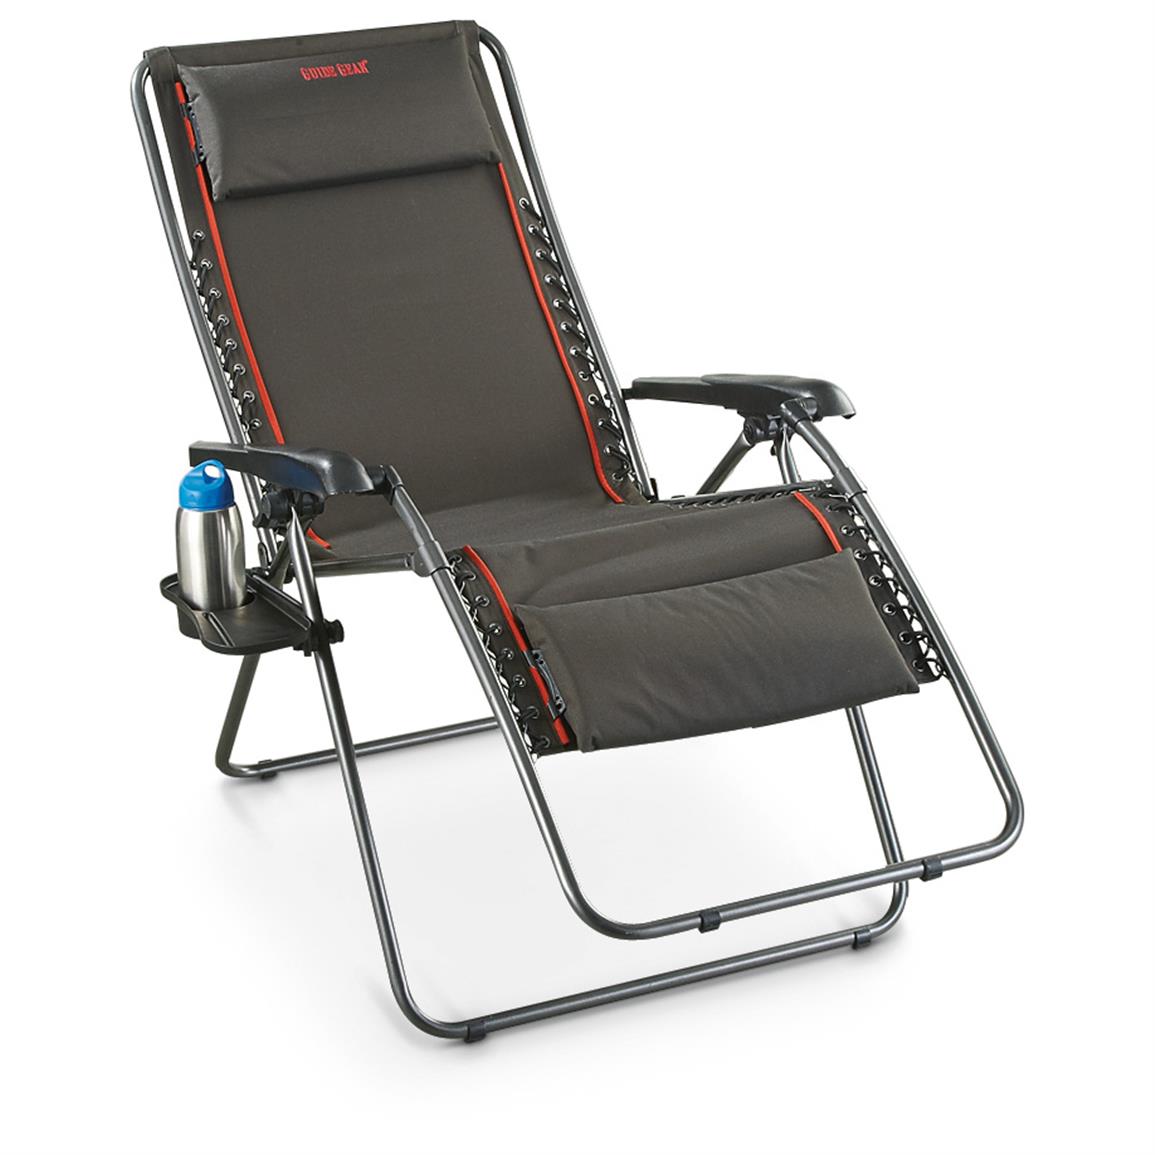 Guide Gear Oversized Zero-gravity Chair - 623495, Chairs at Sportsman's